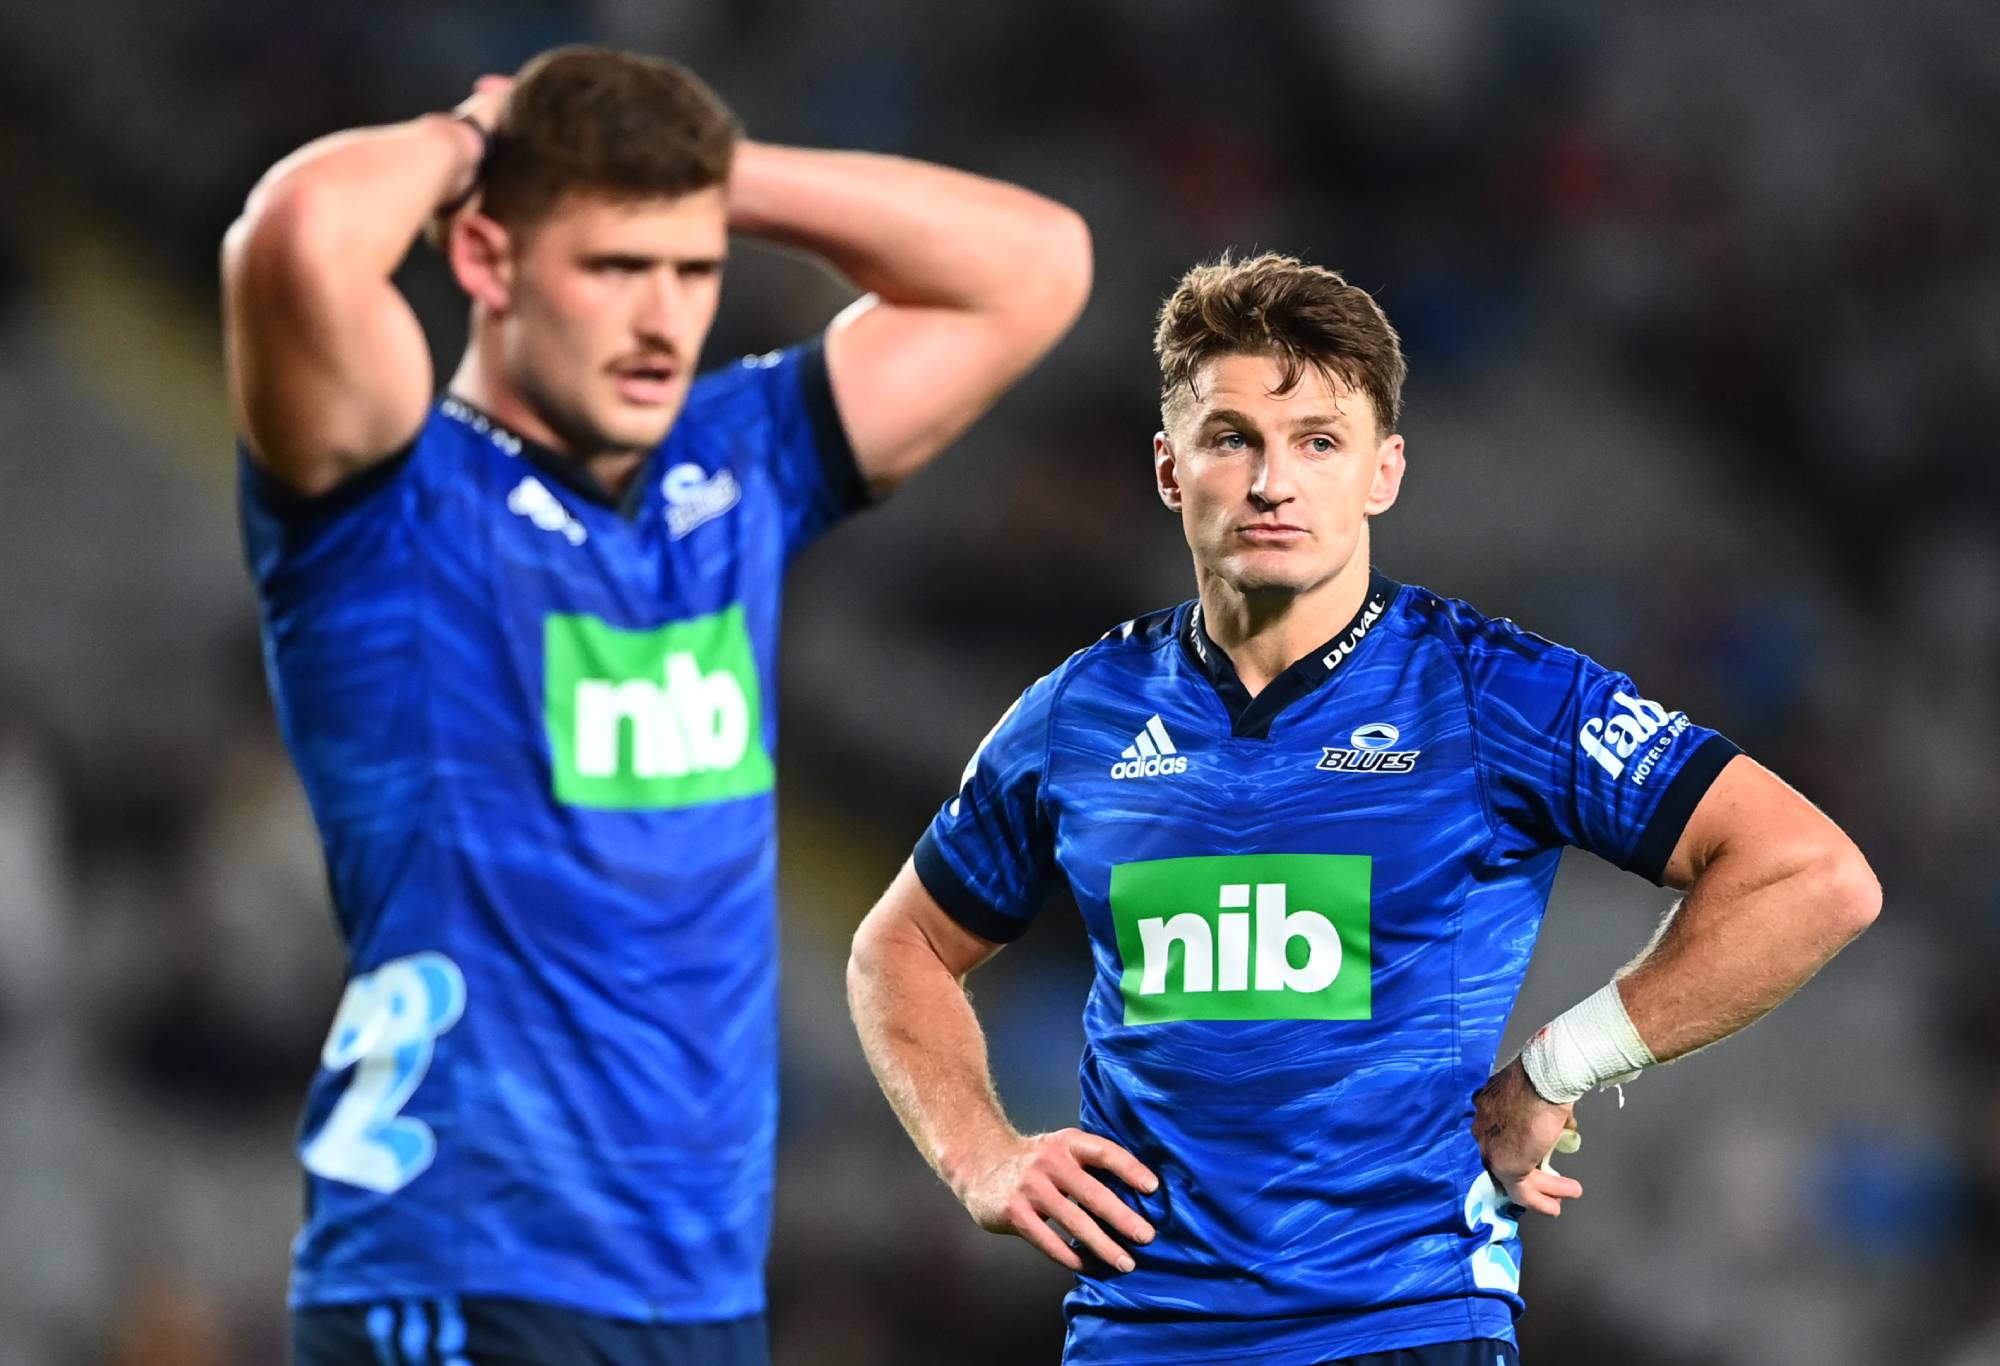 Dalton Papalii and Beauden Barrett of the Blues